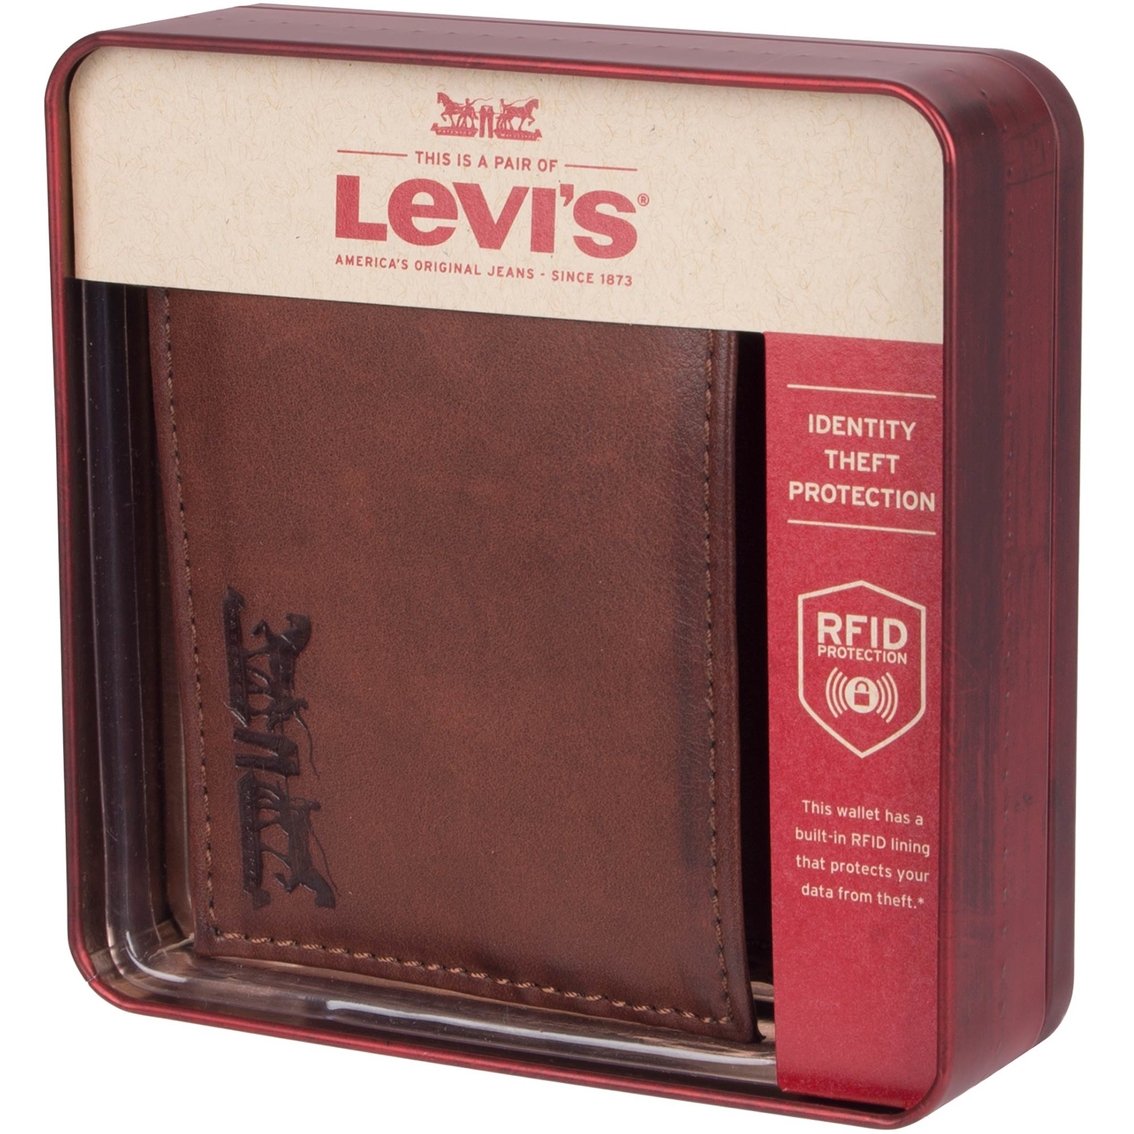 Levi's RFID Passcase Wallet - Image 4 of 4